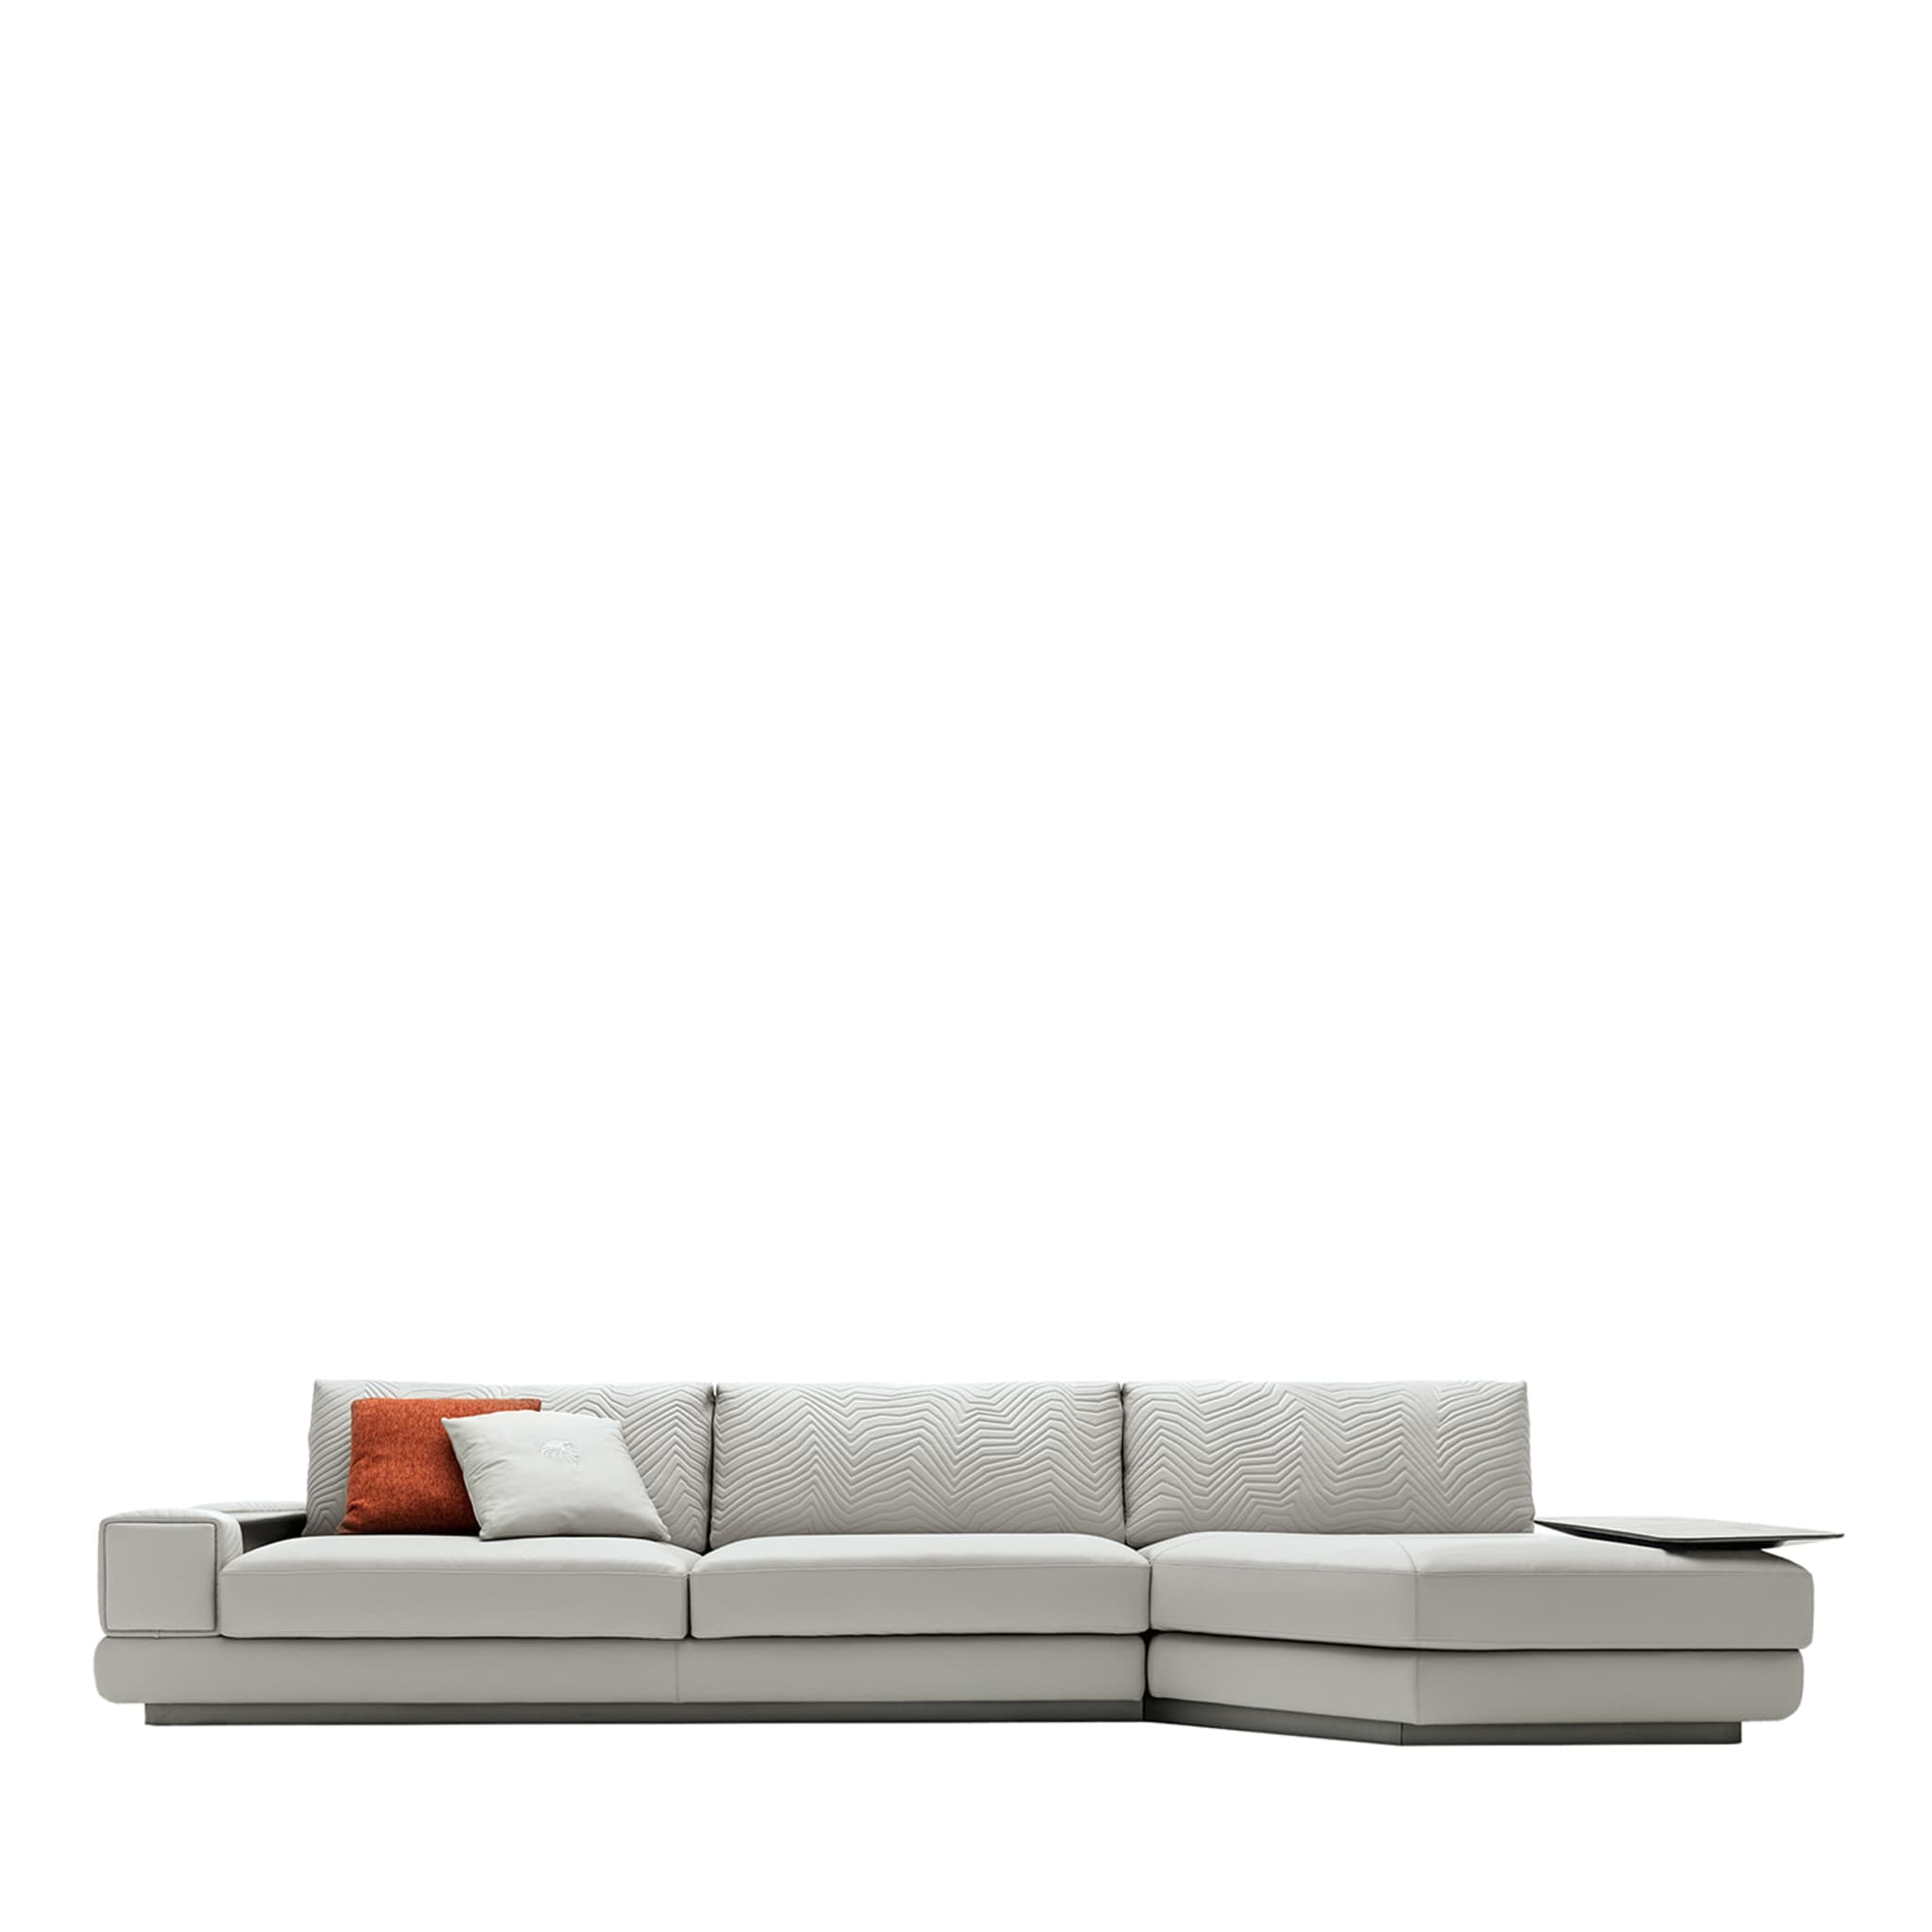 Moonlight Leather Sofa - Composition N.26 - Main view